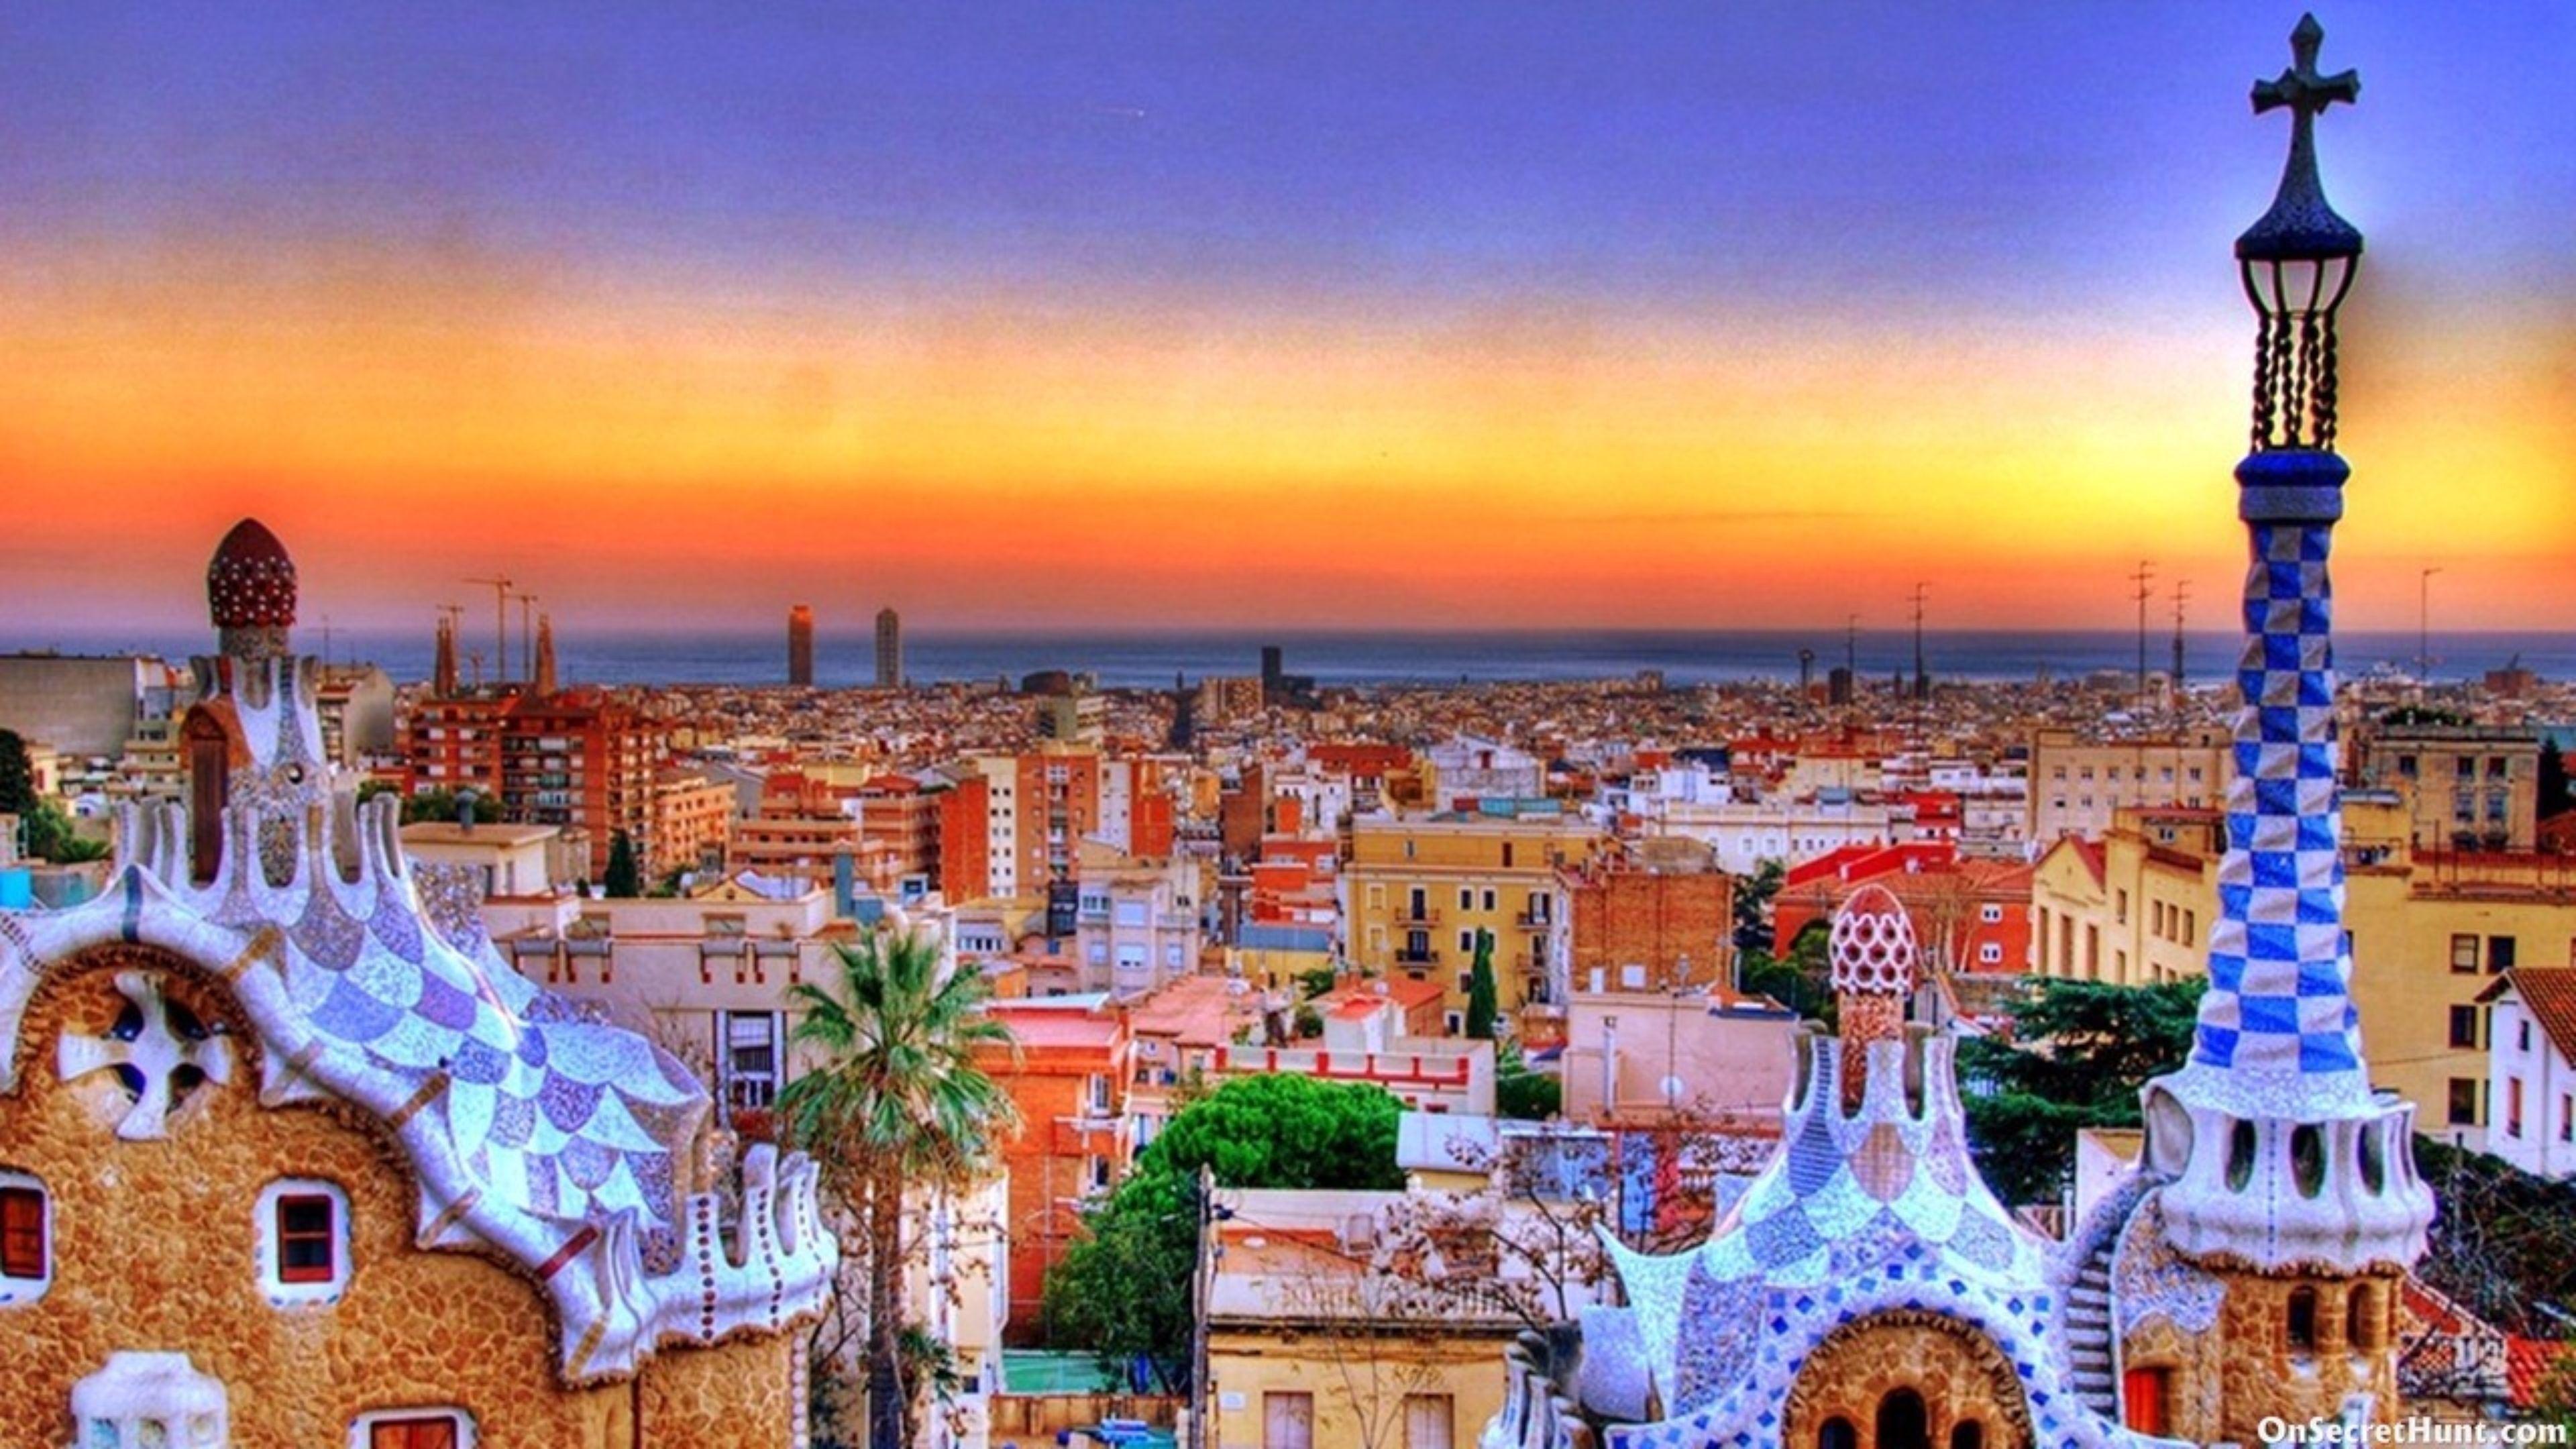 Cool Spain Wallpapers Top Free Cool Spain Backgrounds Images, Photos, Reviews